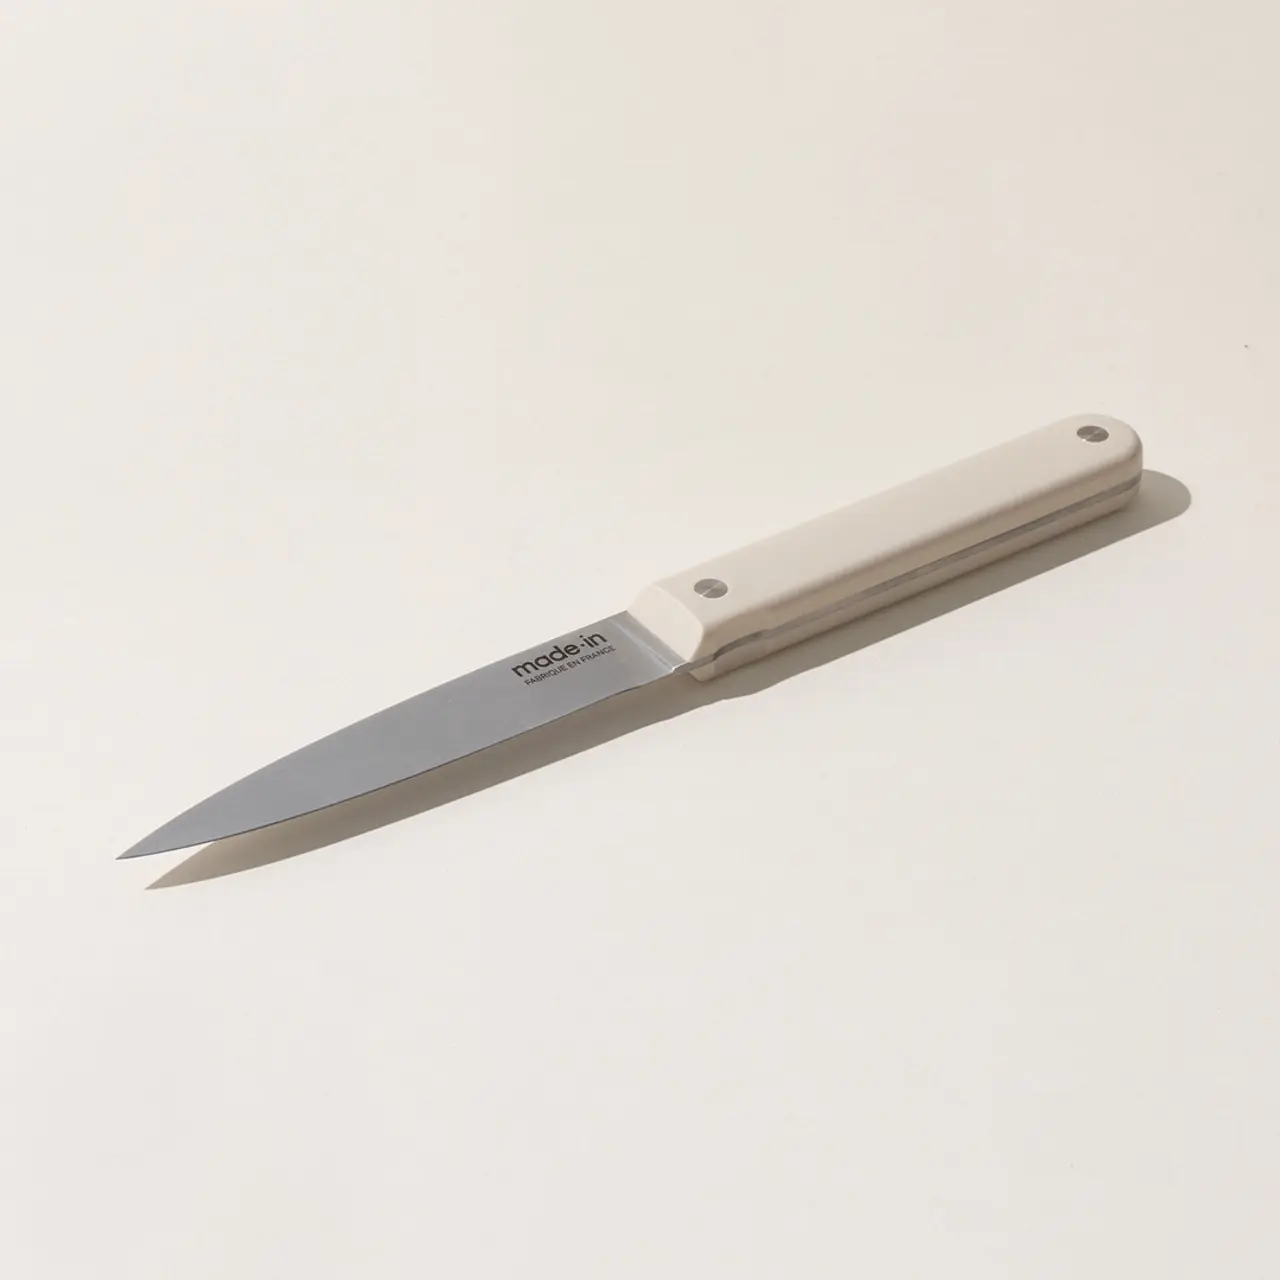 A simple paring knife with a silver blade and a beige handle lies on a plain white background.